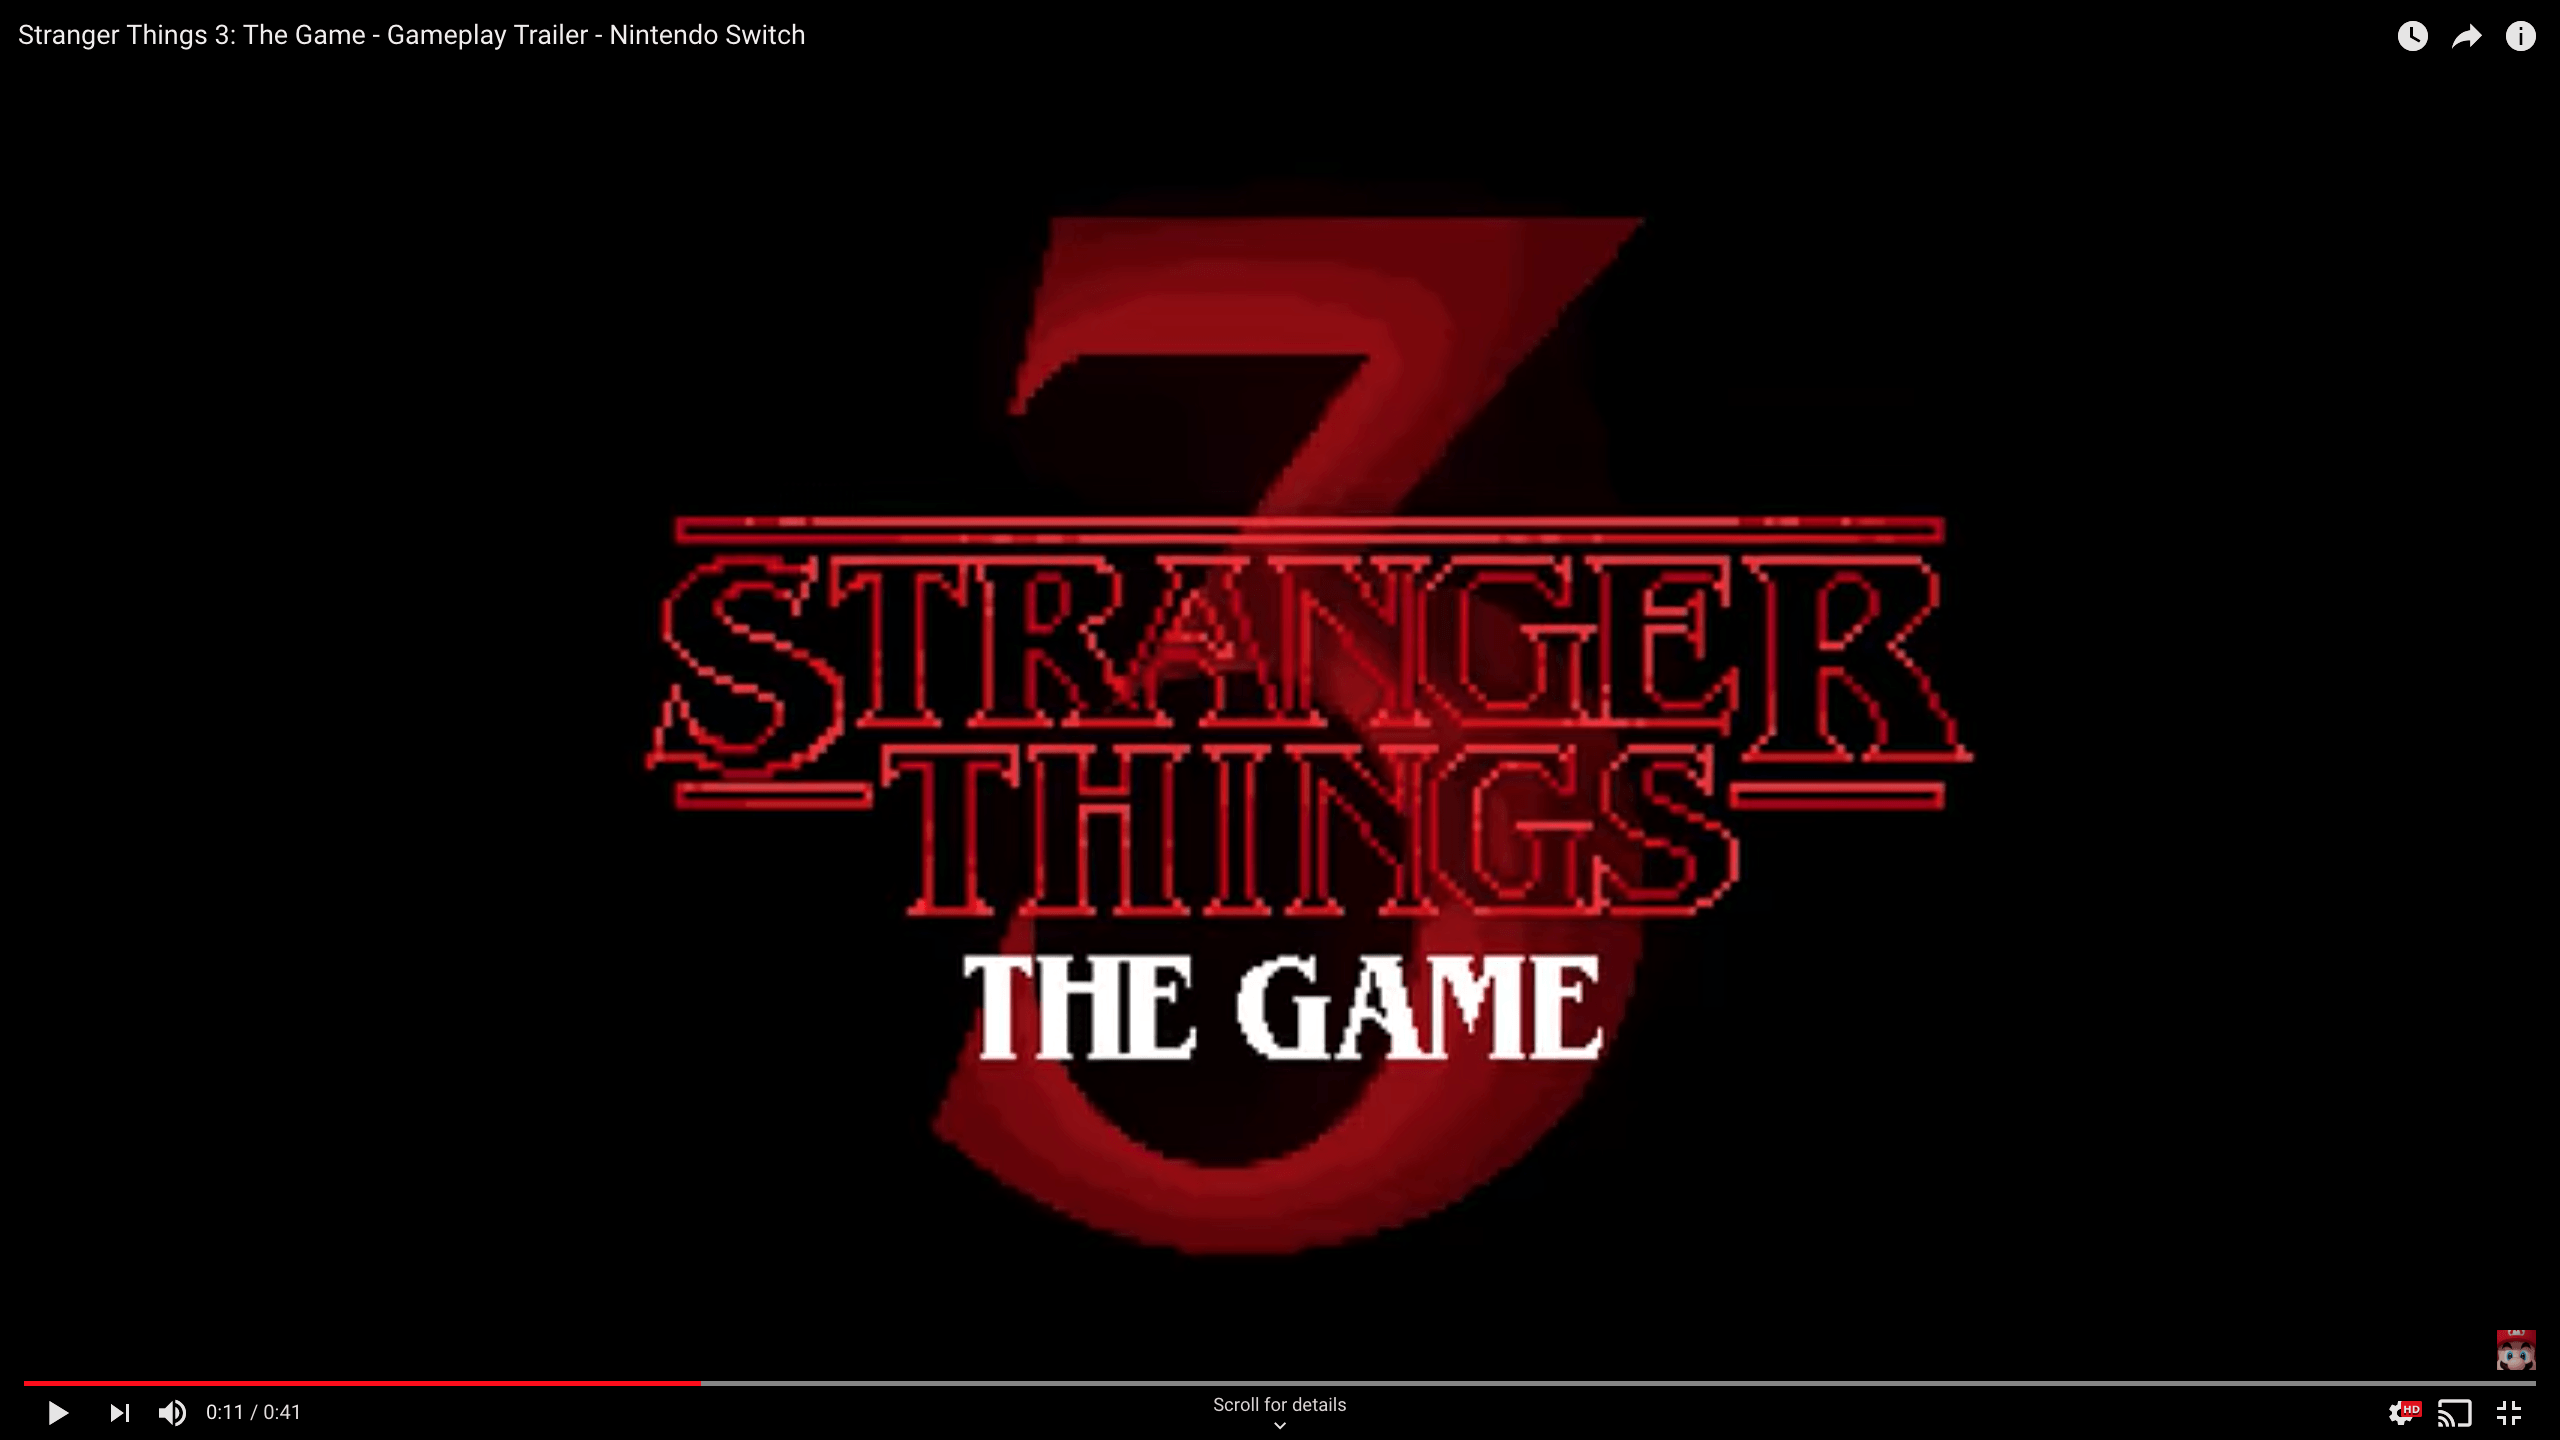 Nintendo Just Announced Stranger Things 3: The Game for the Switch